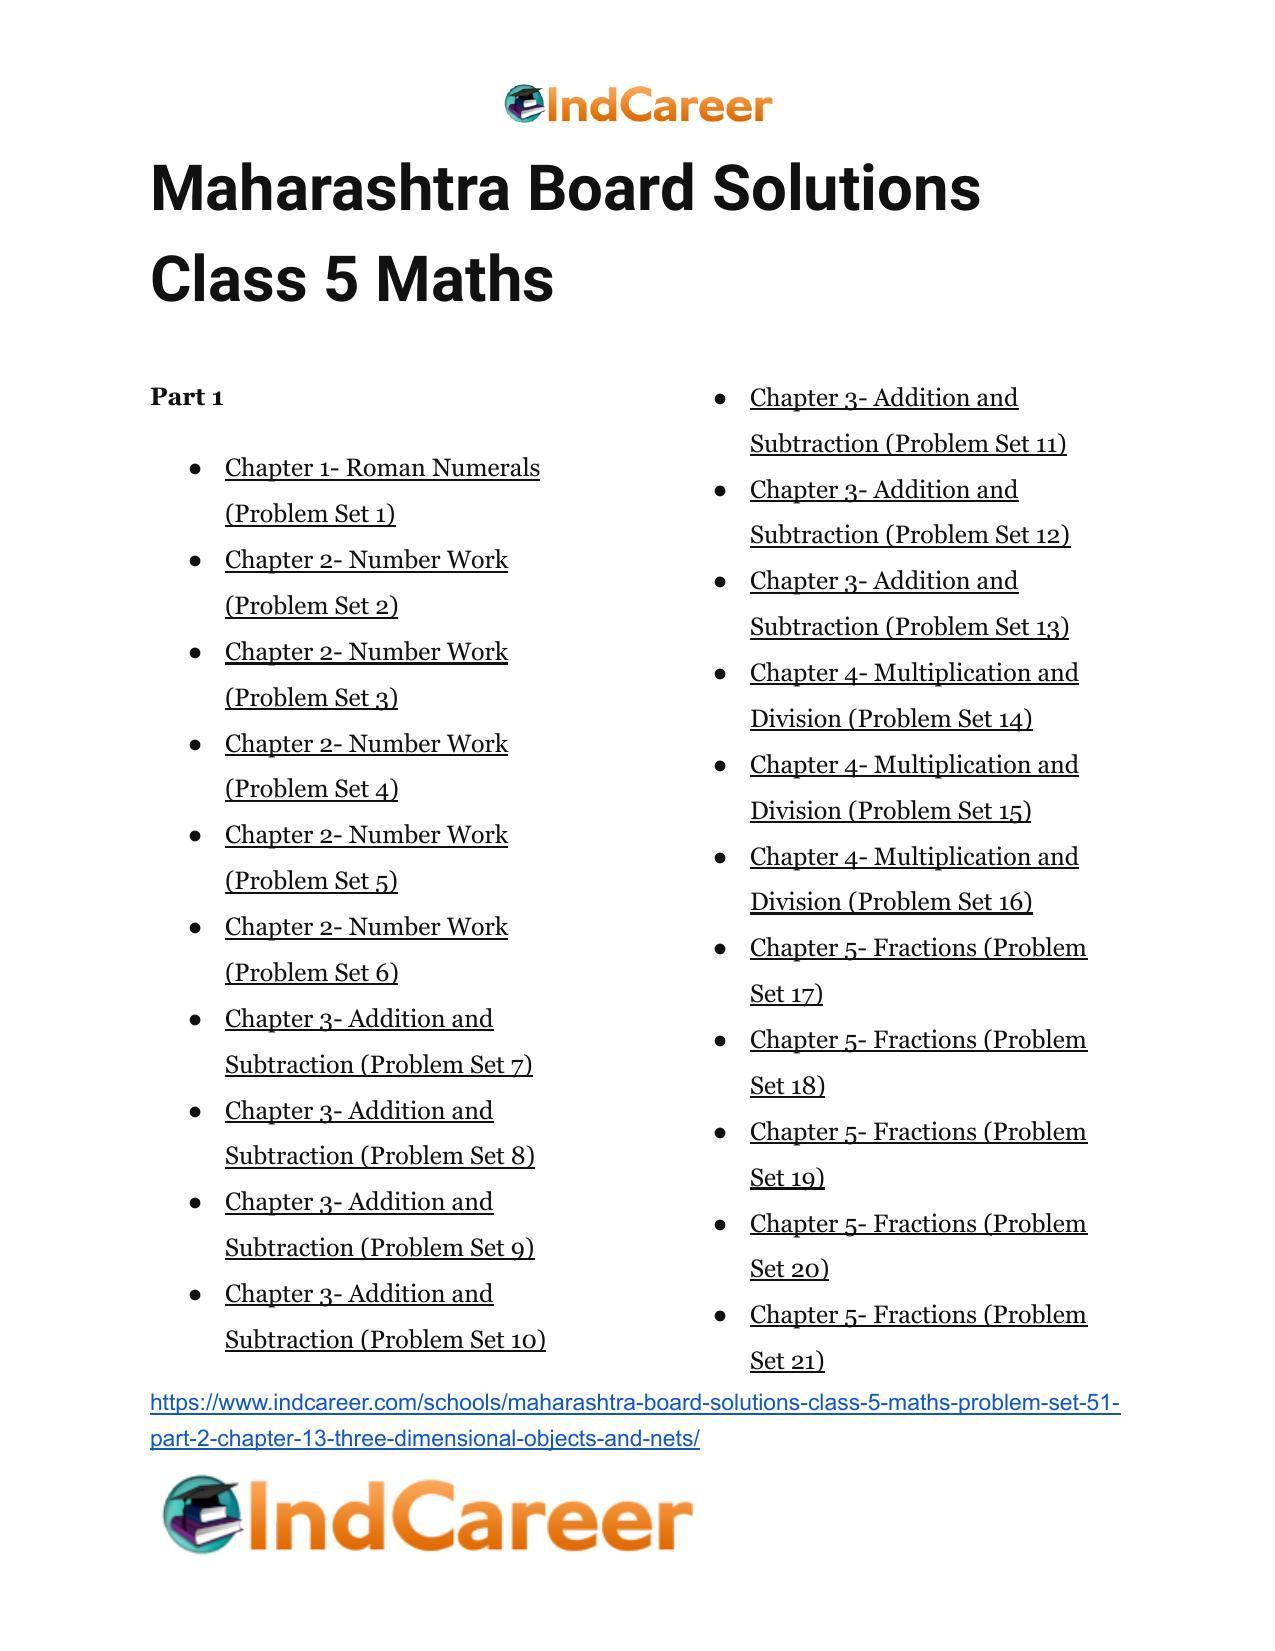 Maharashtra Board Solutions Class 5-Maths (Problem Set 51) - Part 2: Chapter 13- Three Dimensional Objects and Nets - Page 13